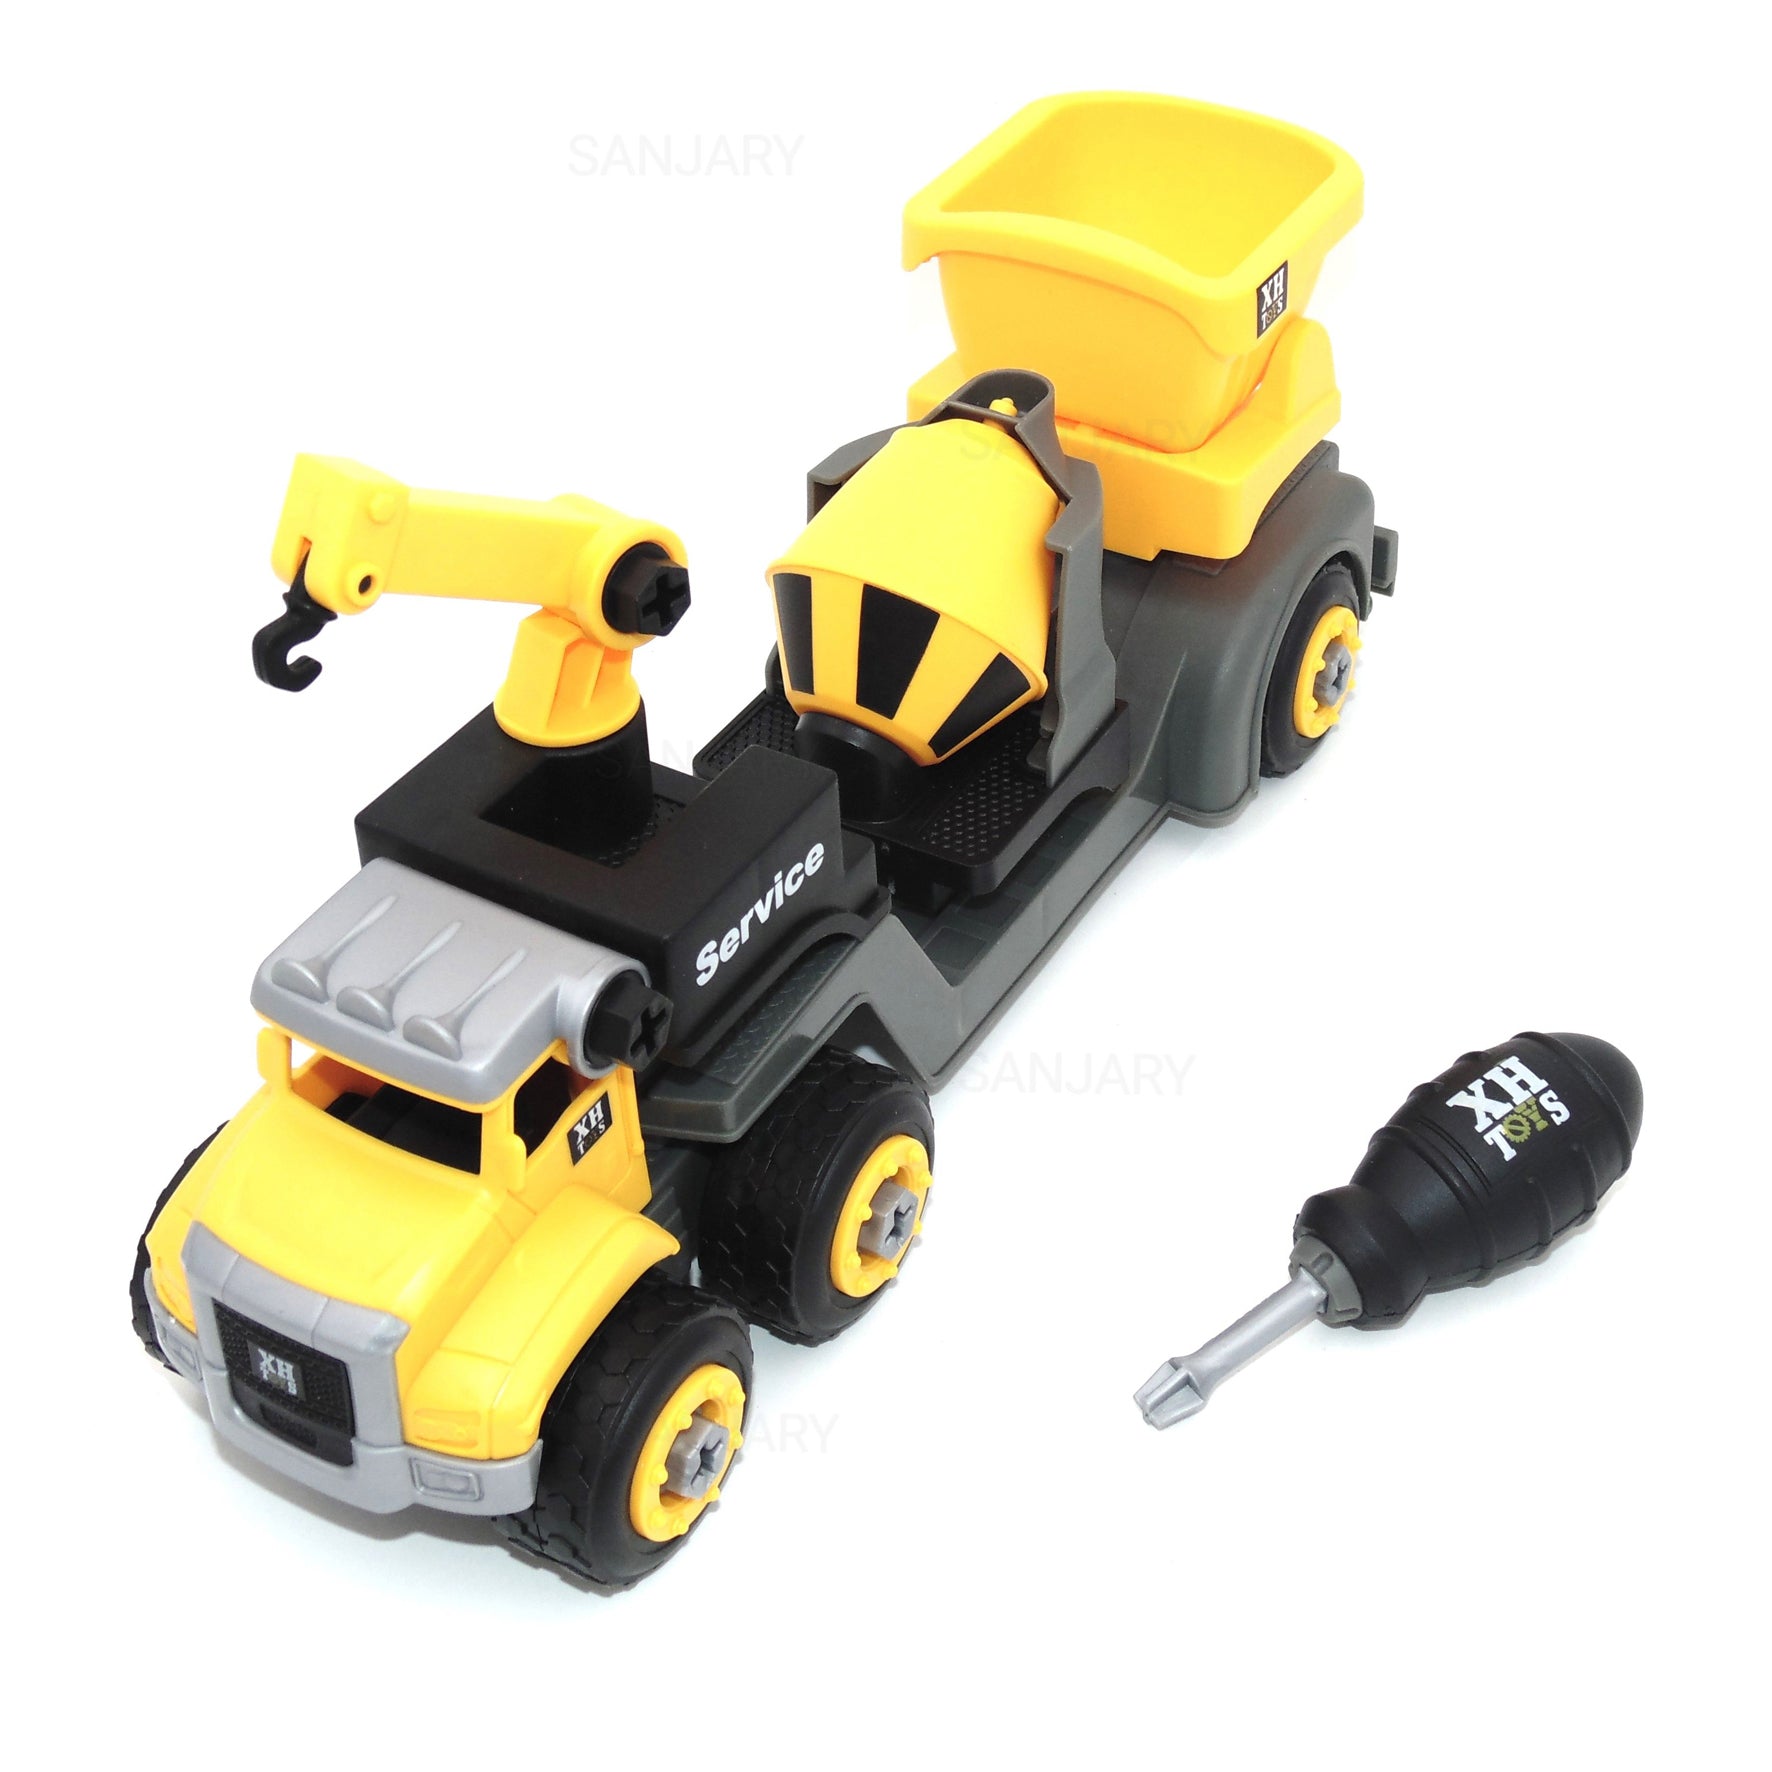 Detachable Engineering Vehicle Car Set Styling Toys DIY Model Combination Manual Disassembly Screw Assembly Car Boy Toy Gift